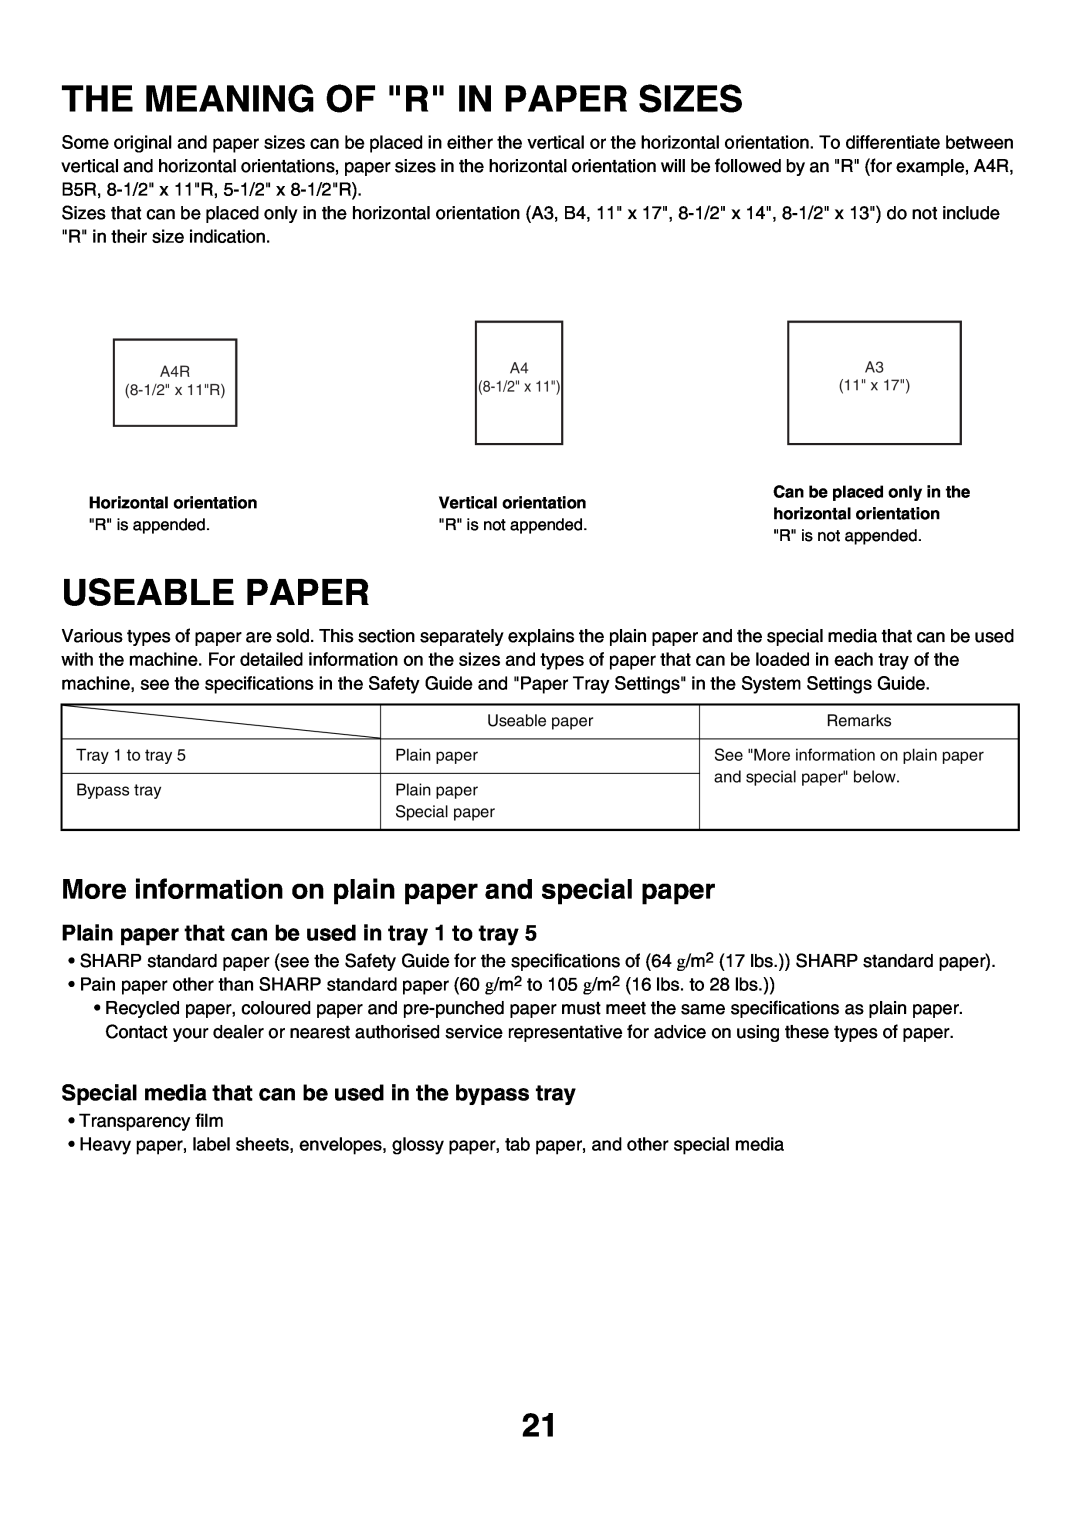 Sharp MX-3500N manual The Meaning Of R In Paper Sizes, Useable Paper, More information on plain paper and special paper 